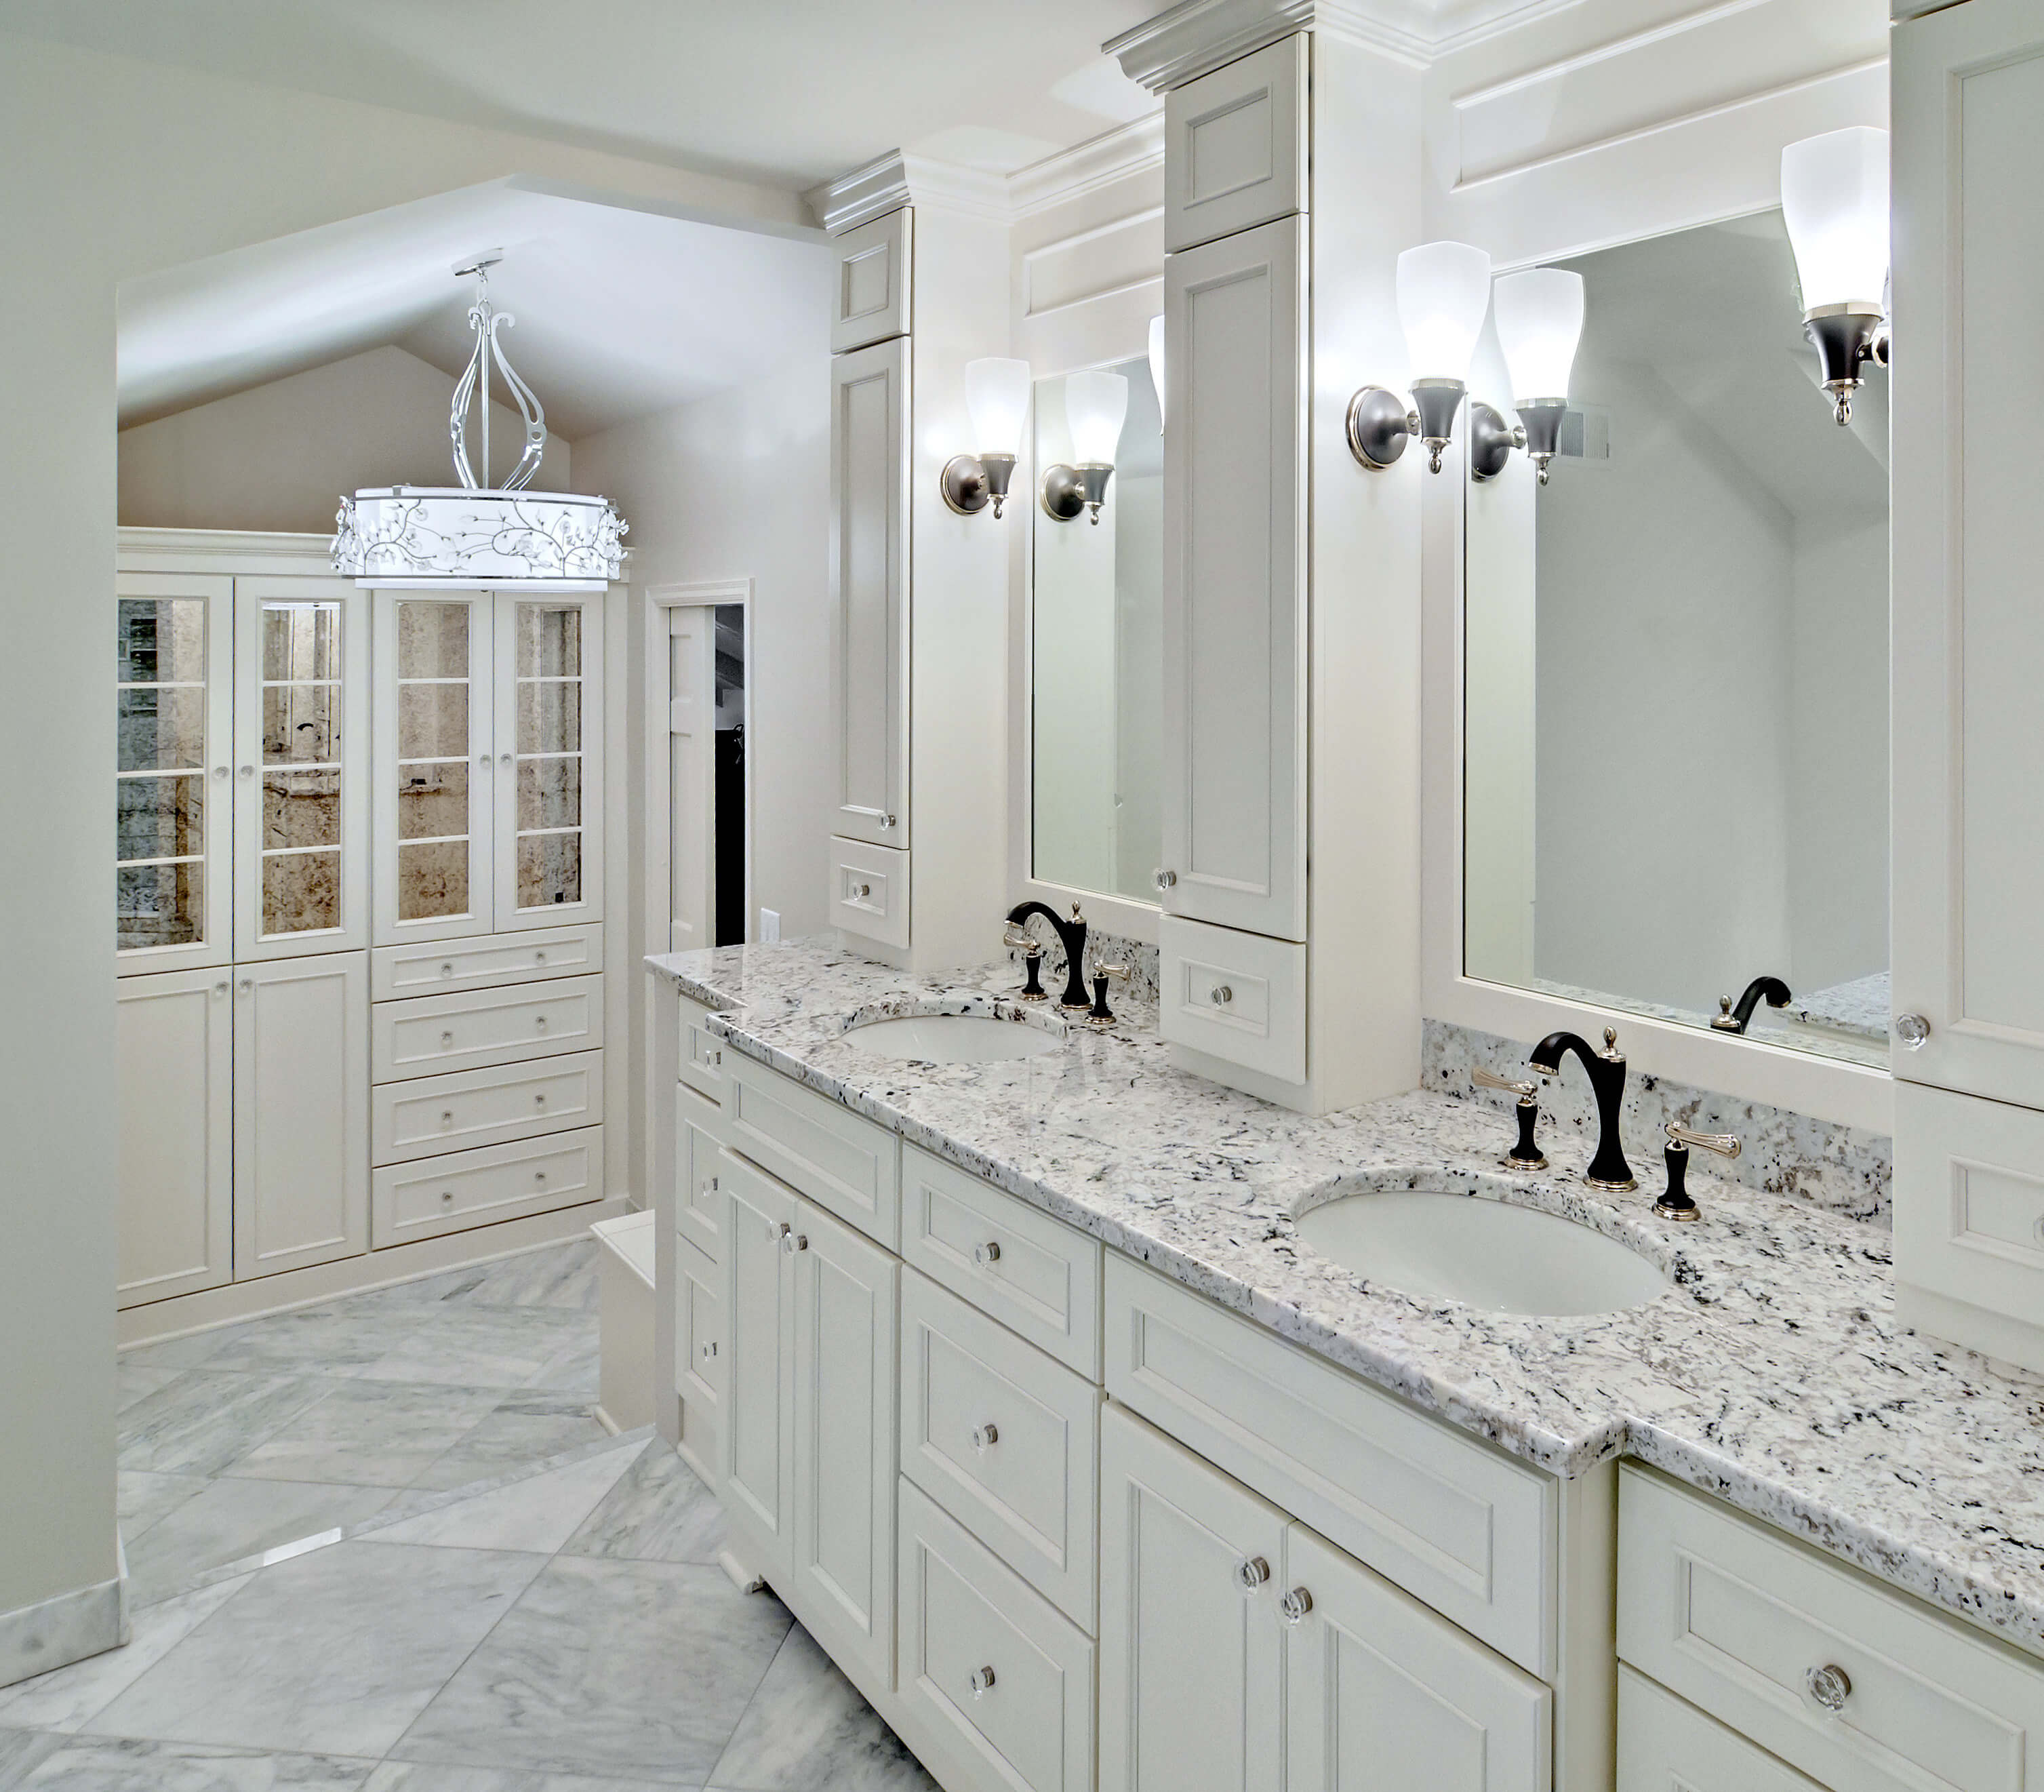 A master bathroom with an all white color palette with mirror mullion cabinet doors.